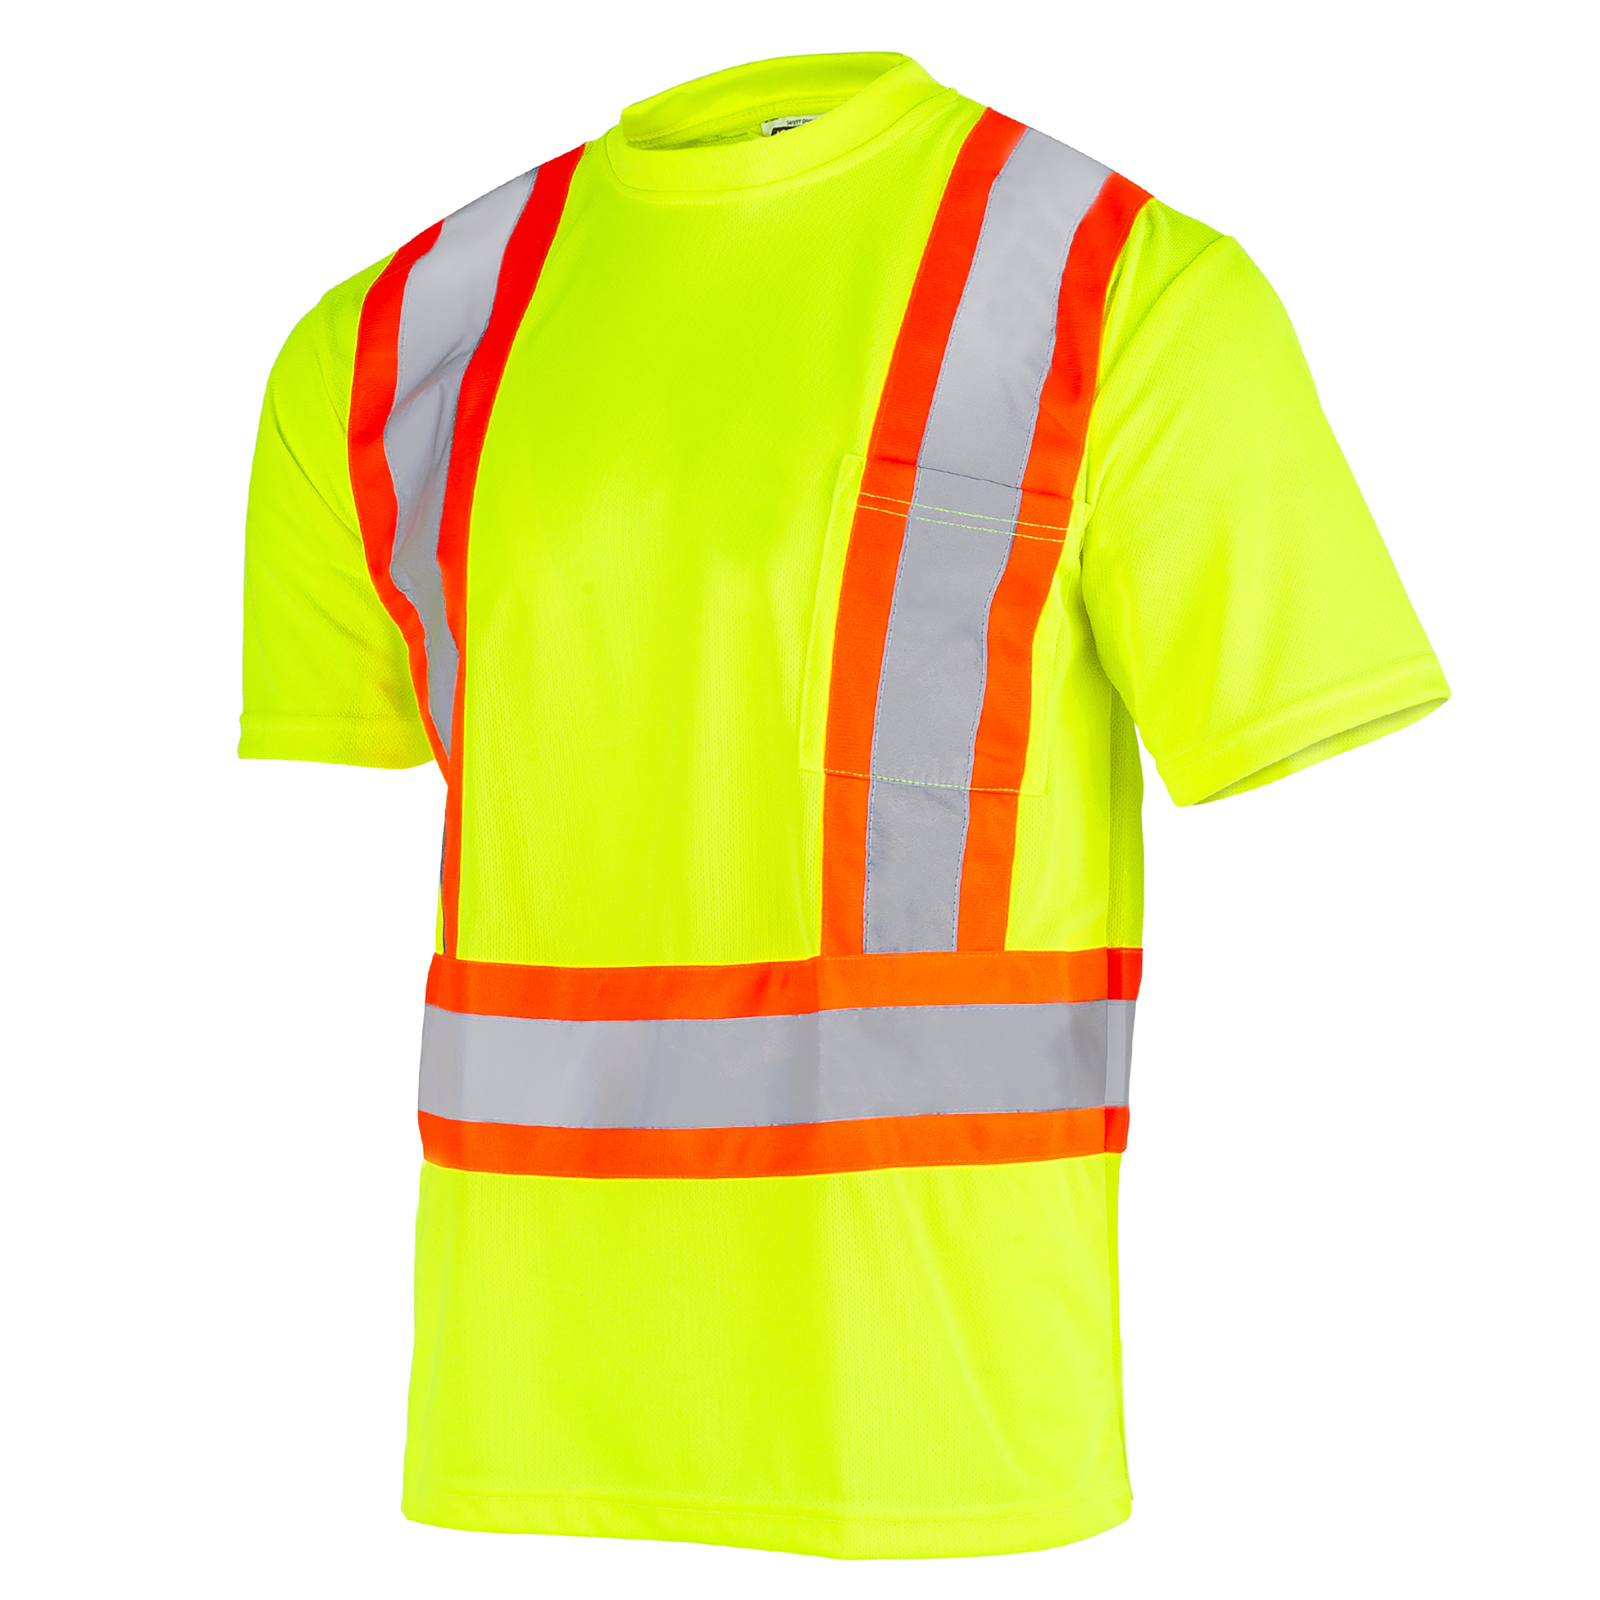 High visibility reflective two tone safety pocket shirt.